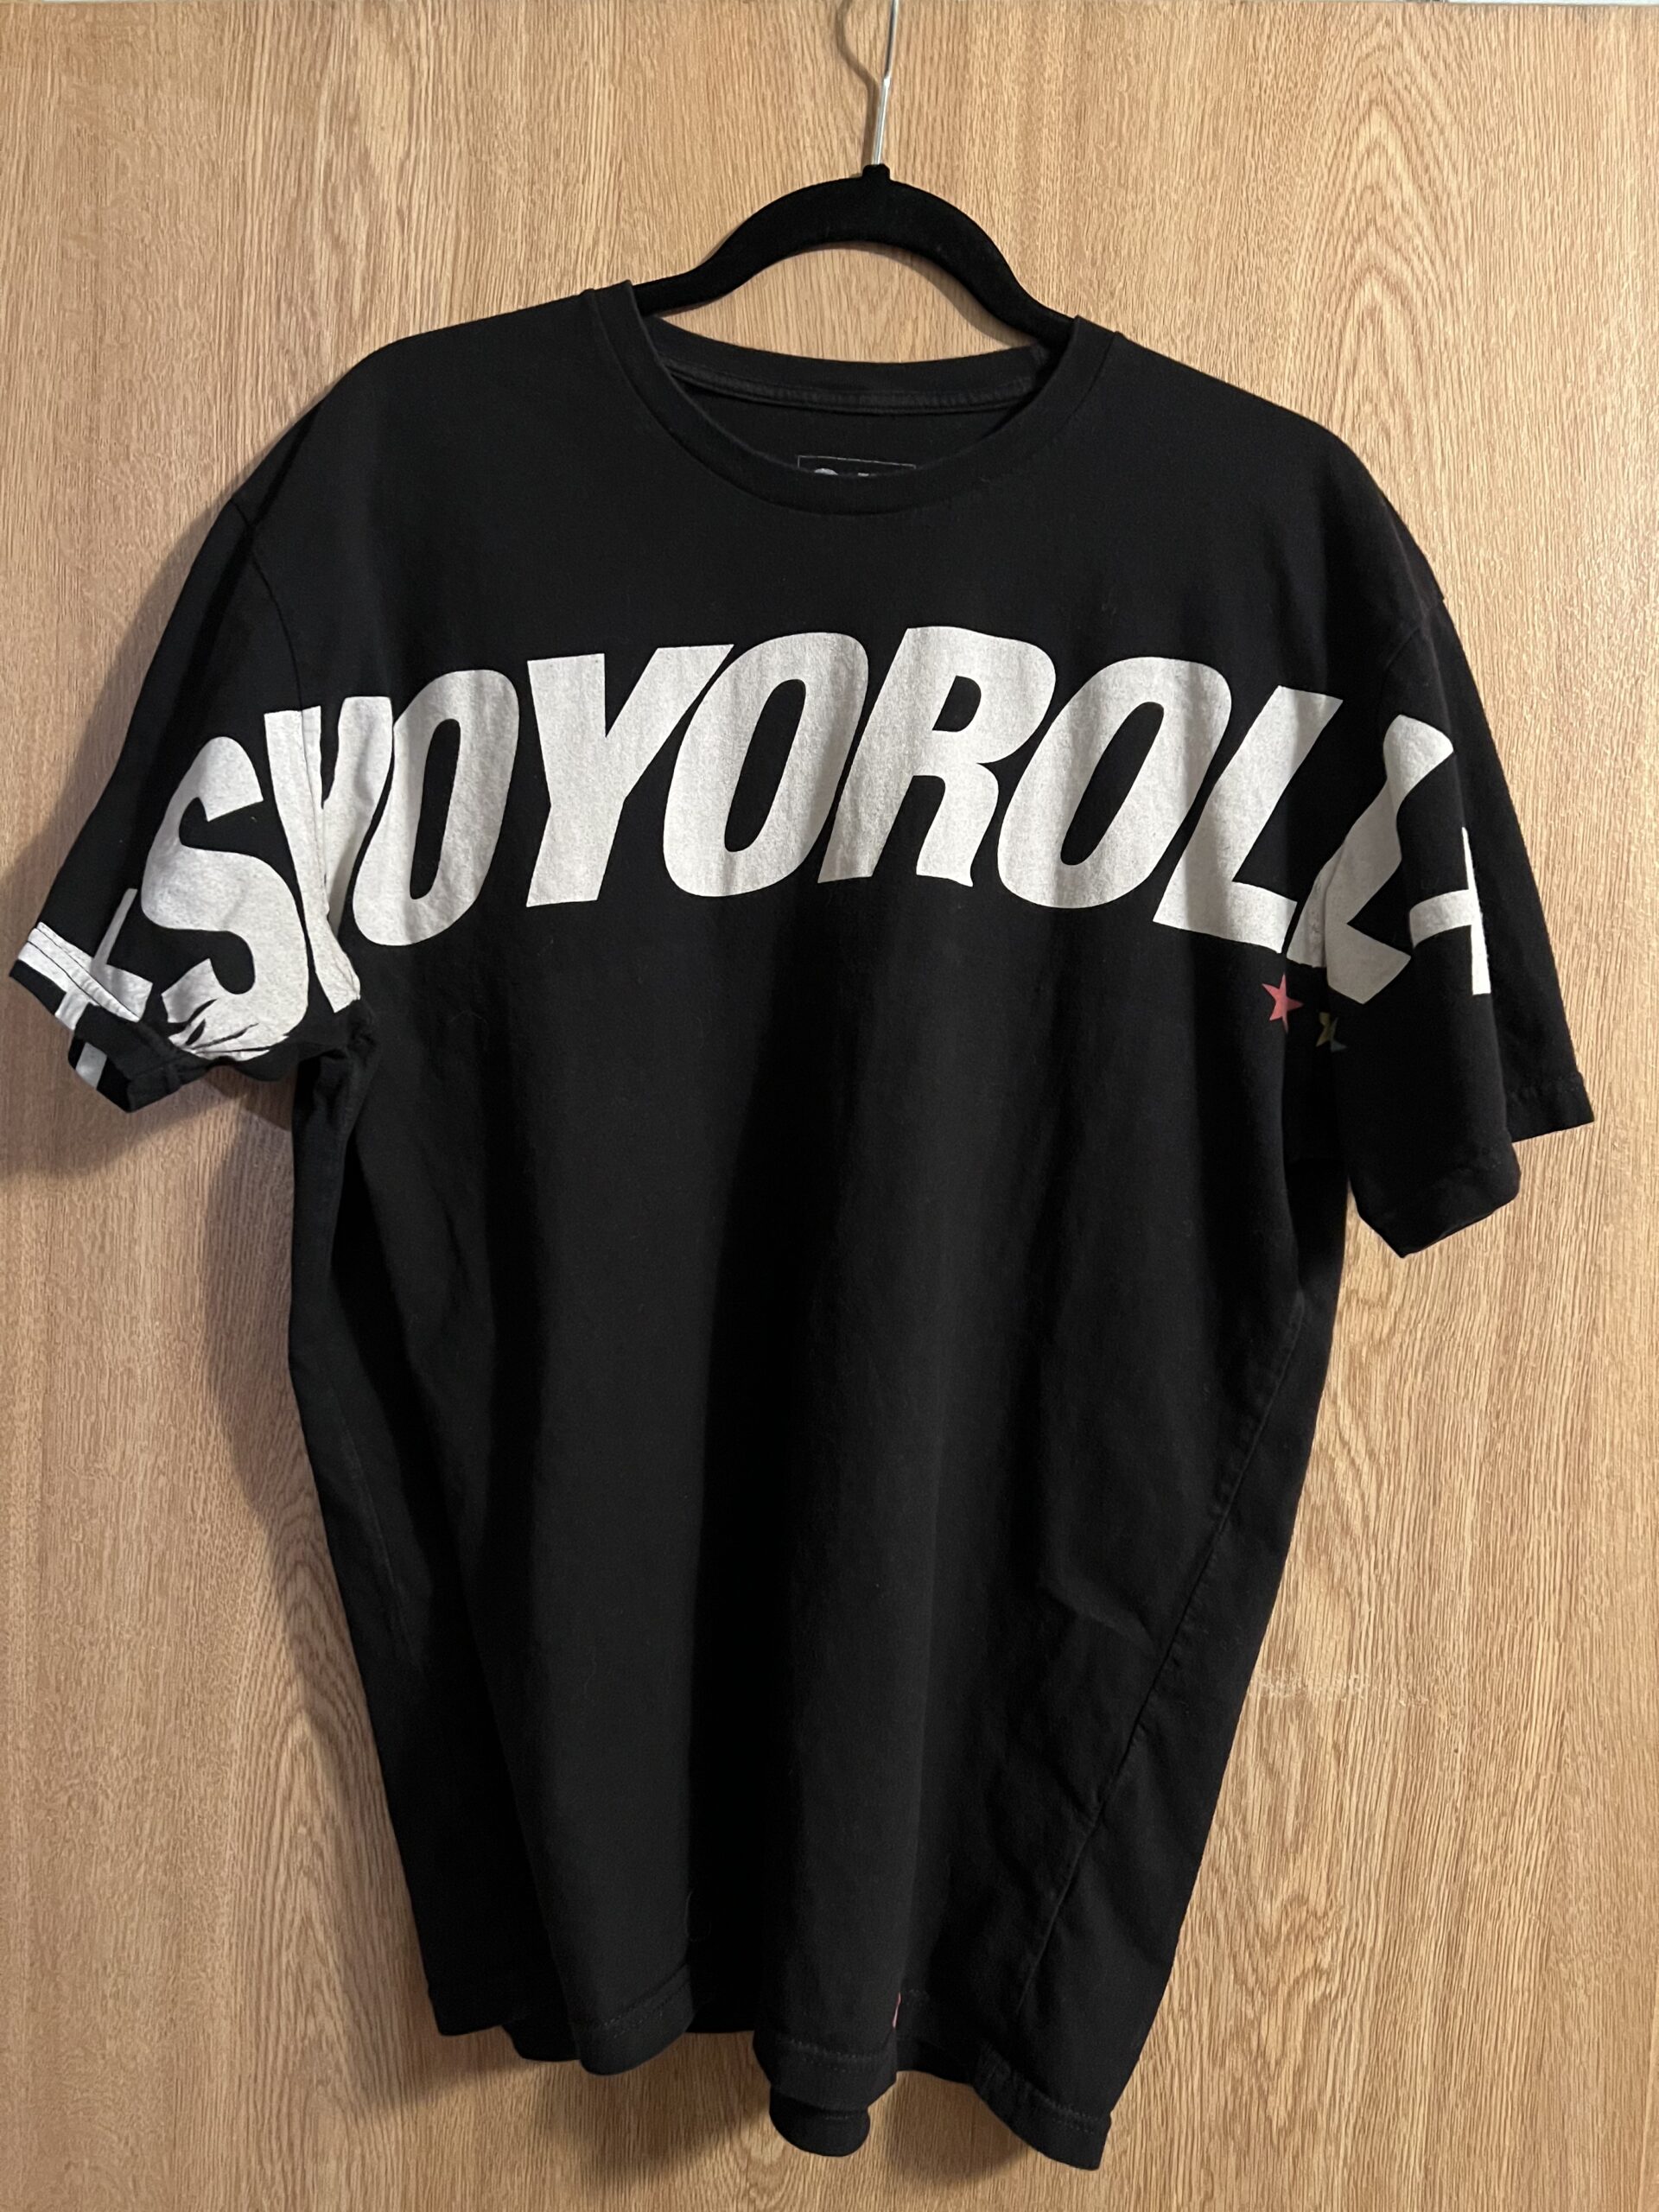 Size: XL
Condition: Good
Price: ?